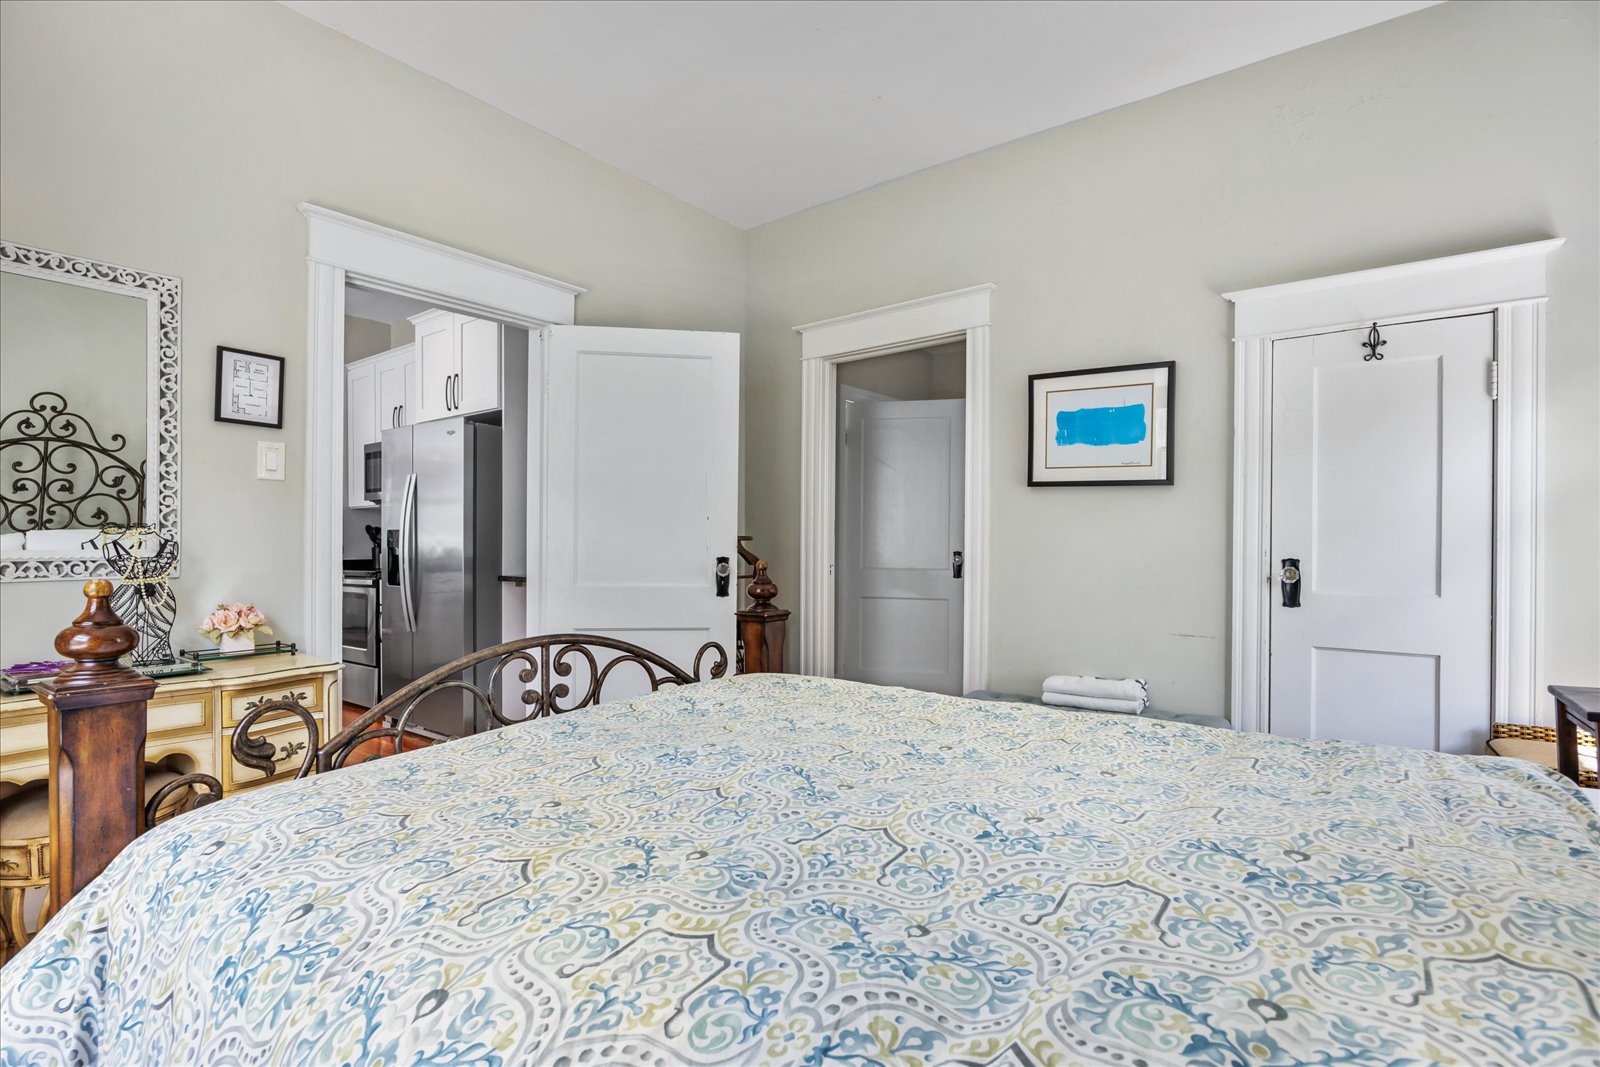 Unit B – The master bedroom offers a regal queen bed & large windows